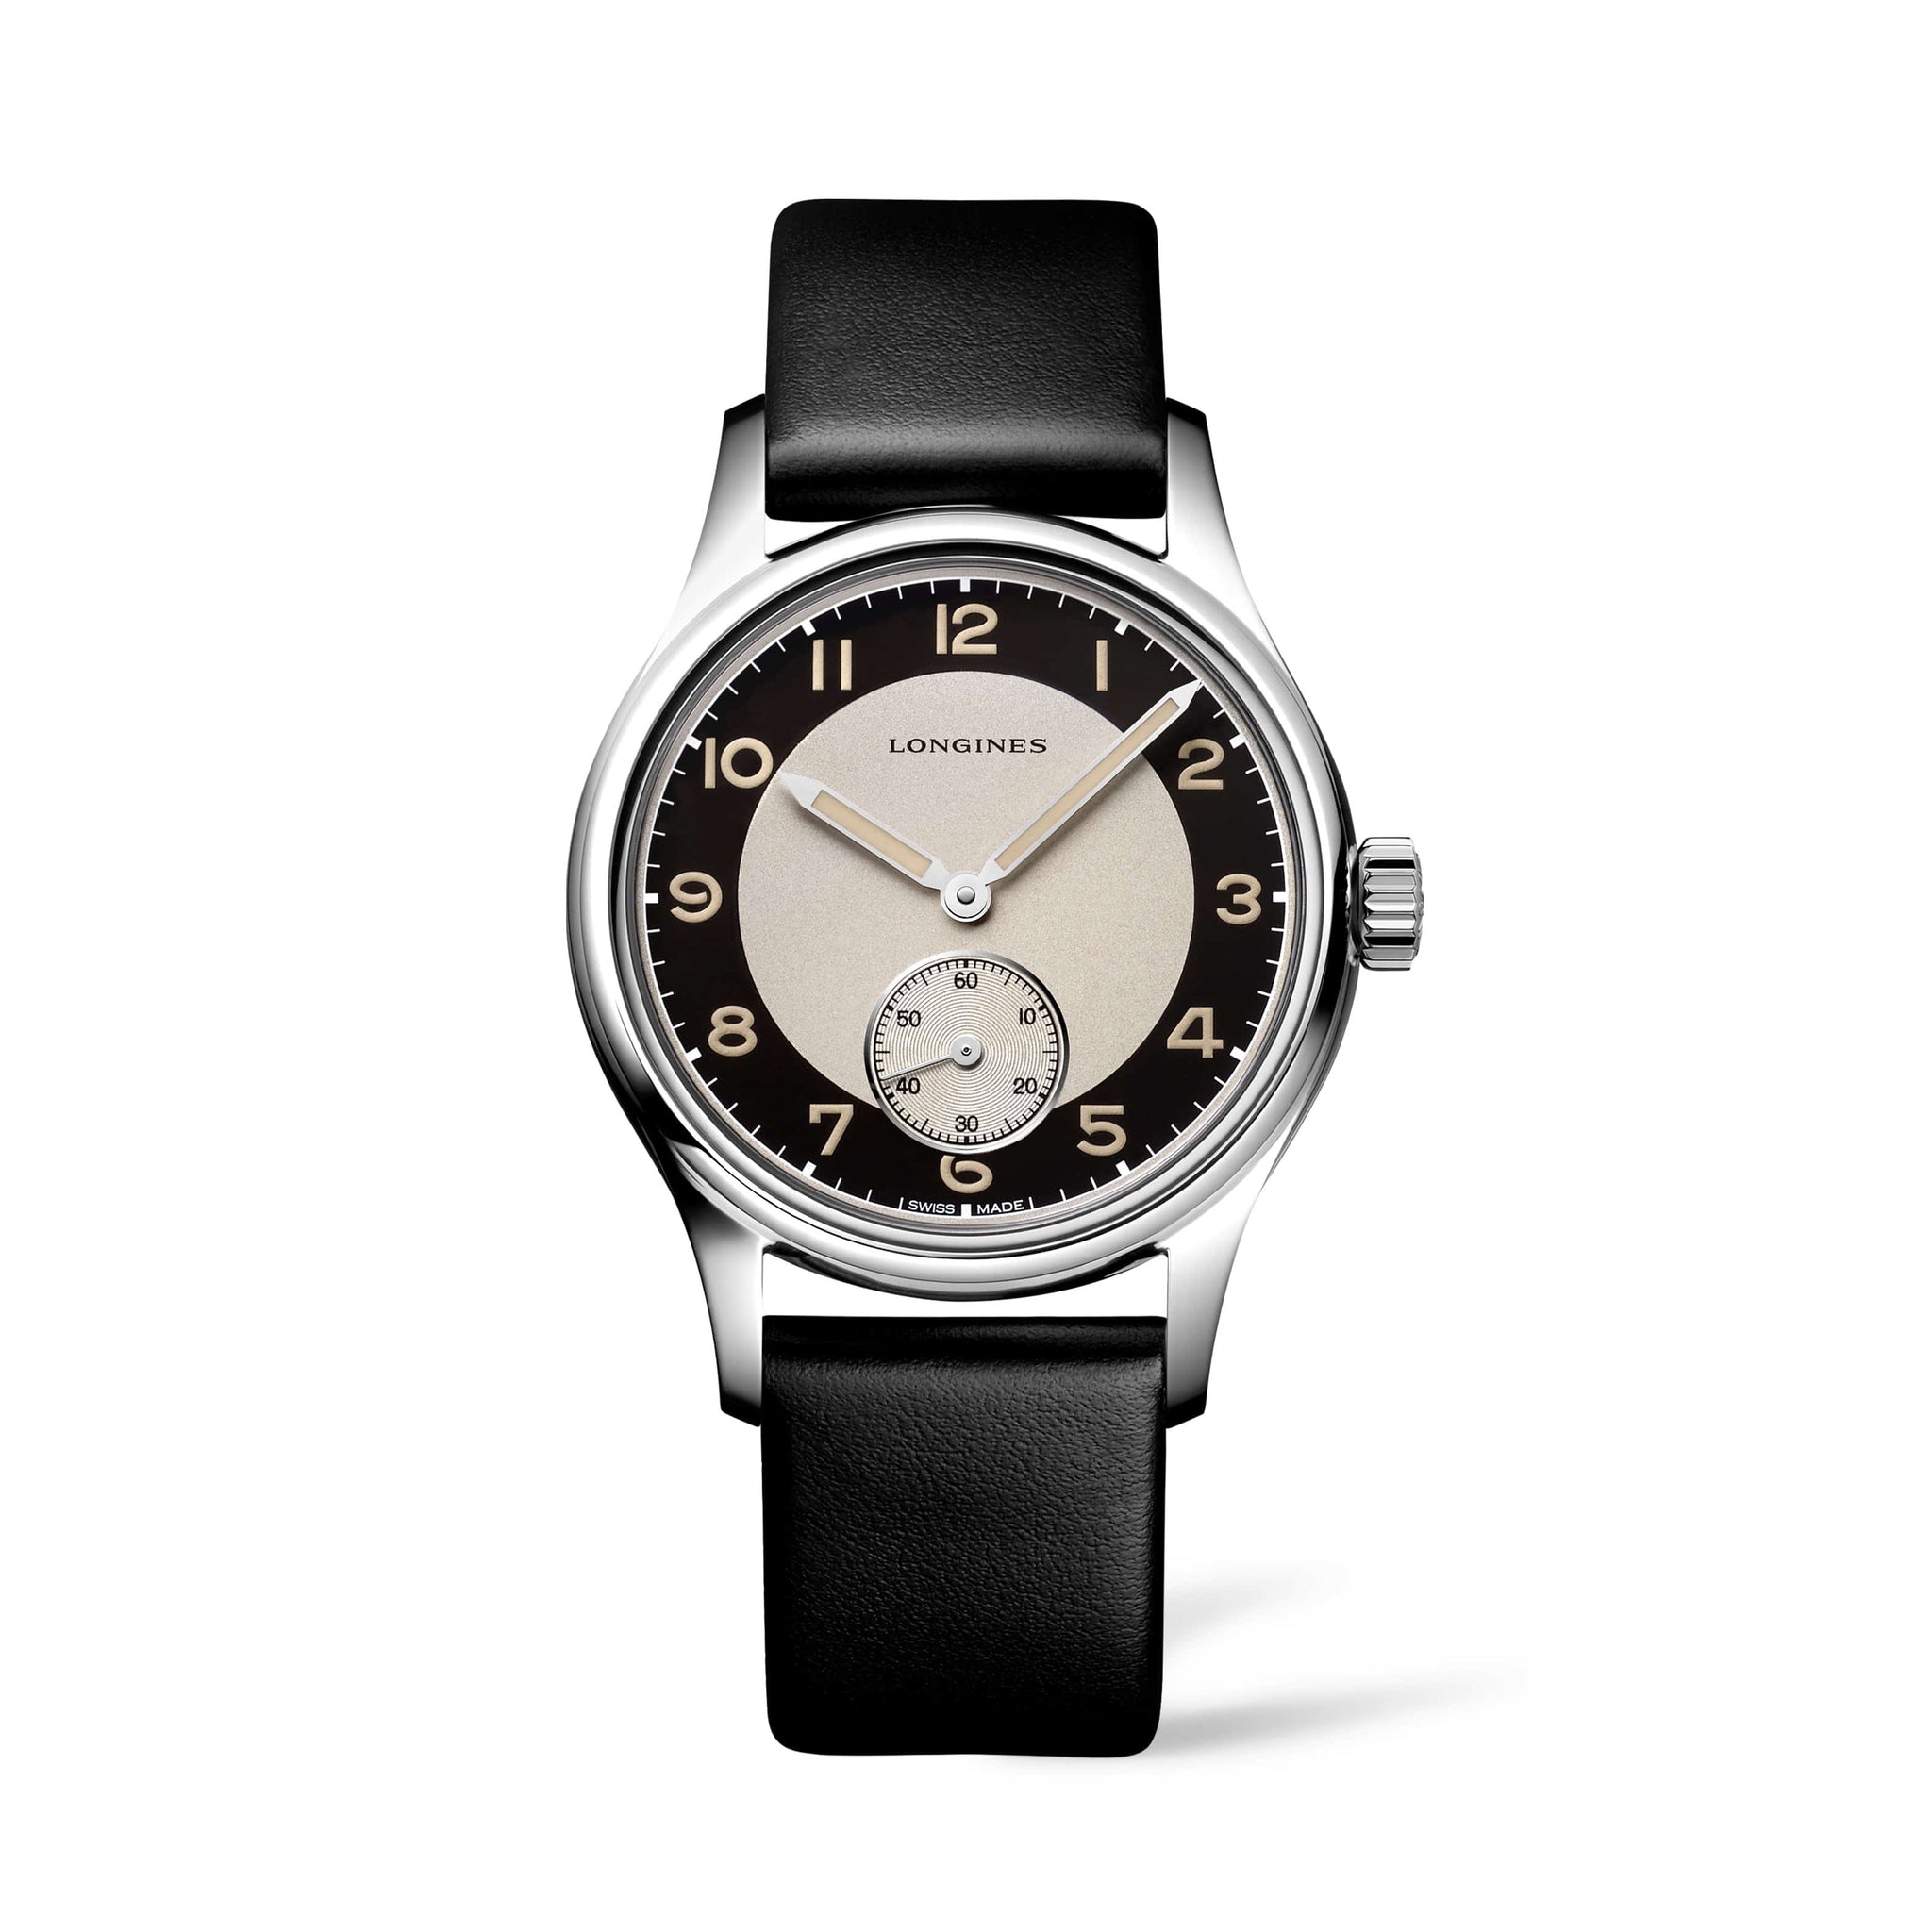 The Longines Heritage Classic 38mm Automatic, Long's Jewelers